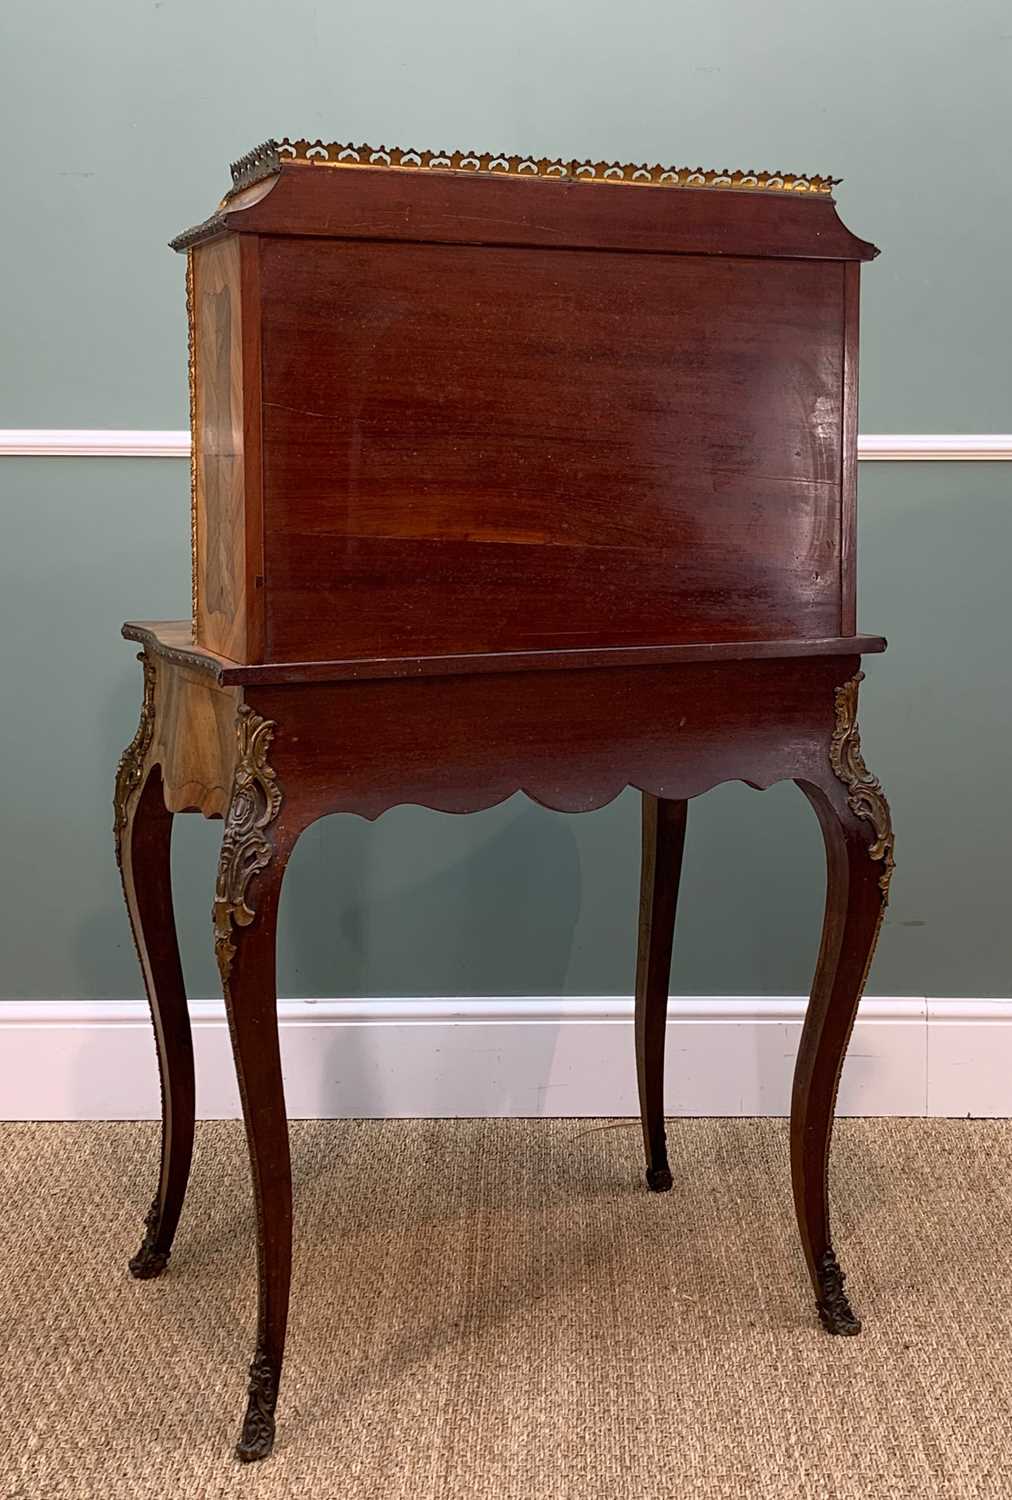 GOOD PORCELAIN & GILT BRONZE MOUNTED BONHEUR DU JOUR, 19th Century, in kingwood and rosewood with - Image 7 of 12